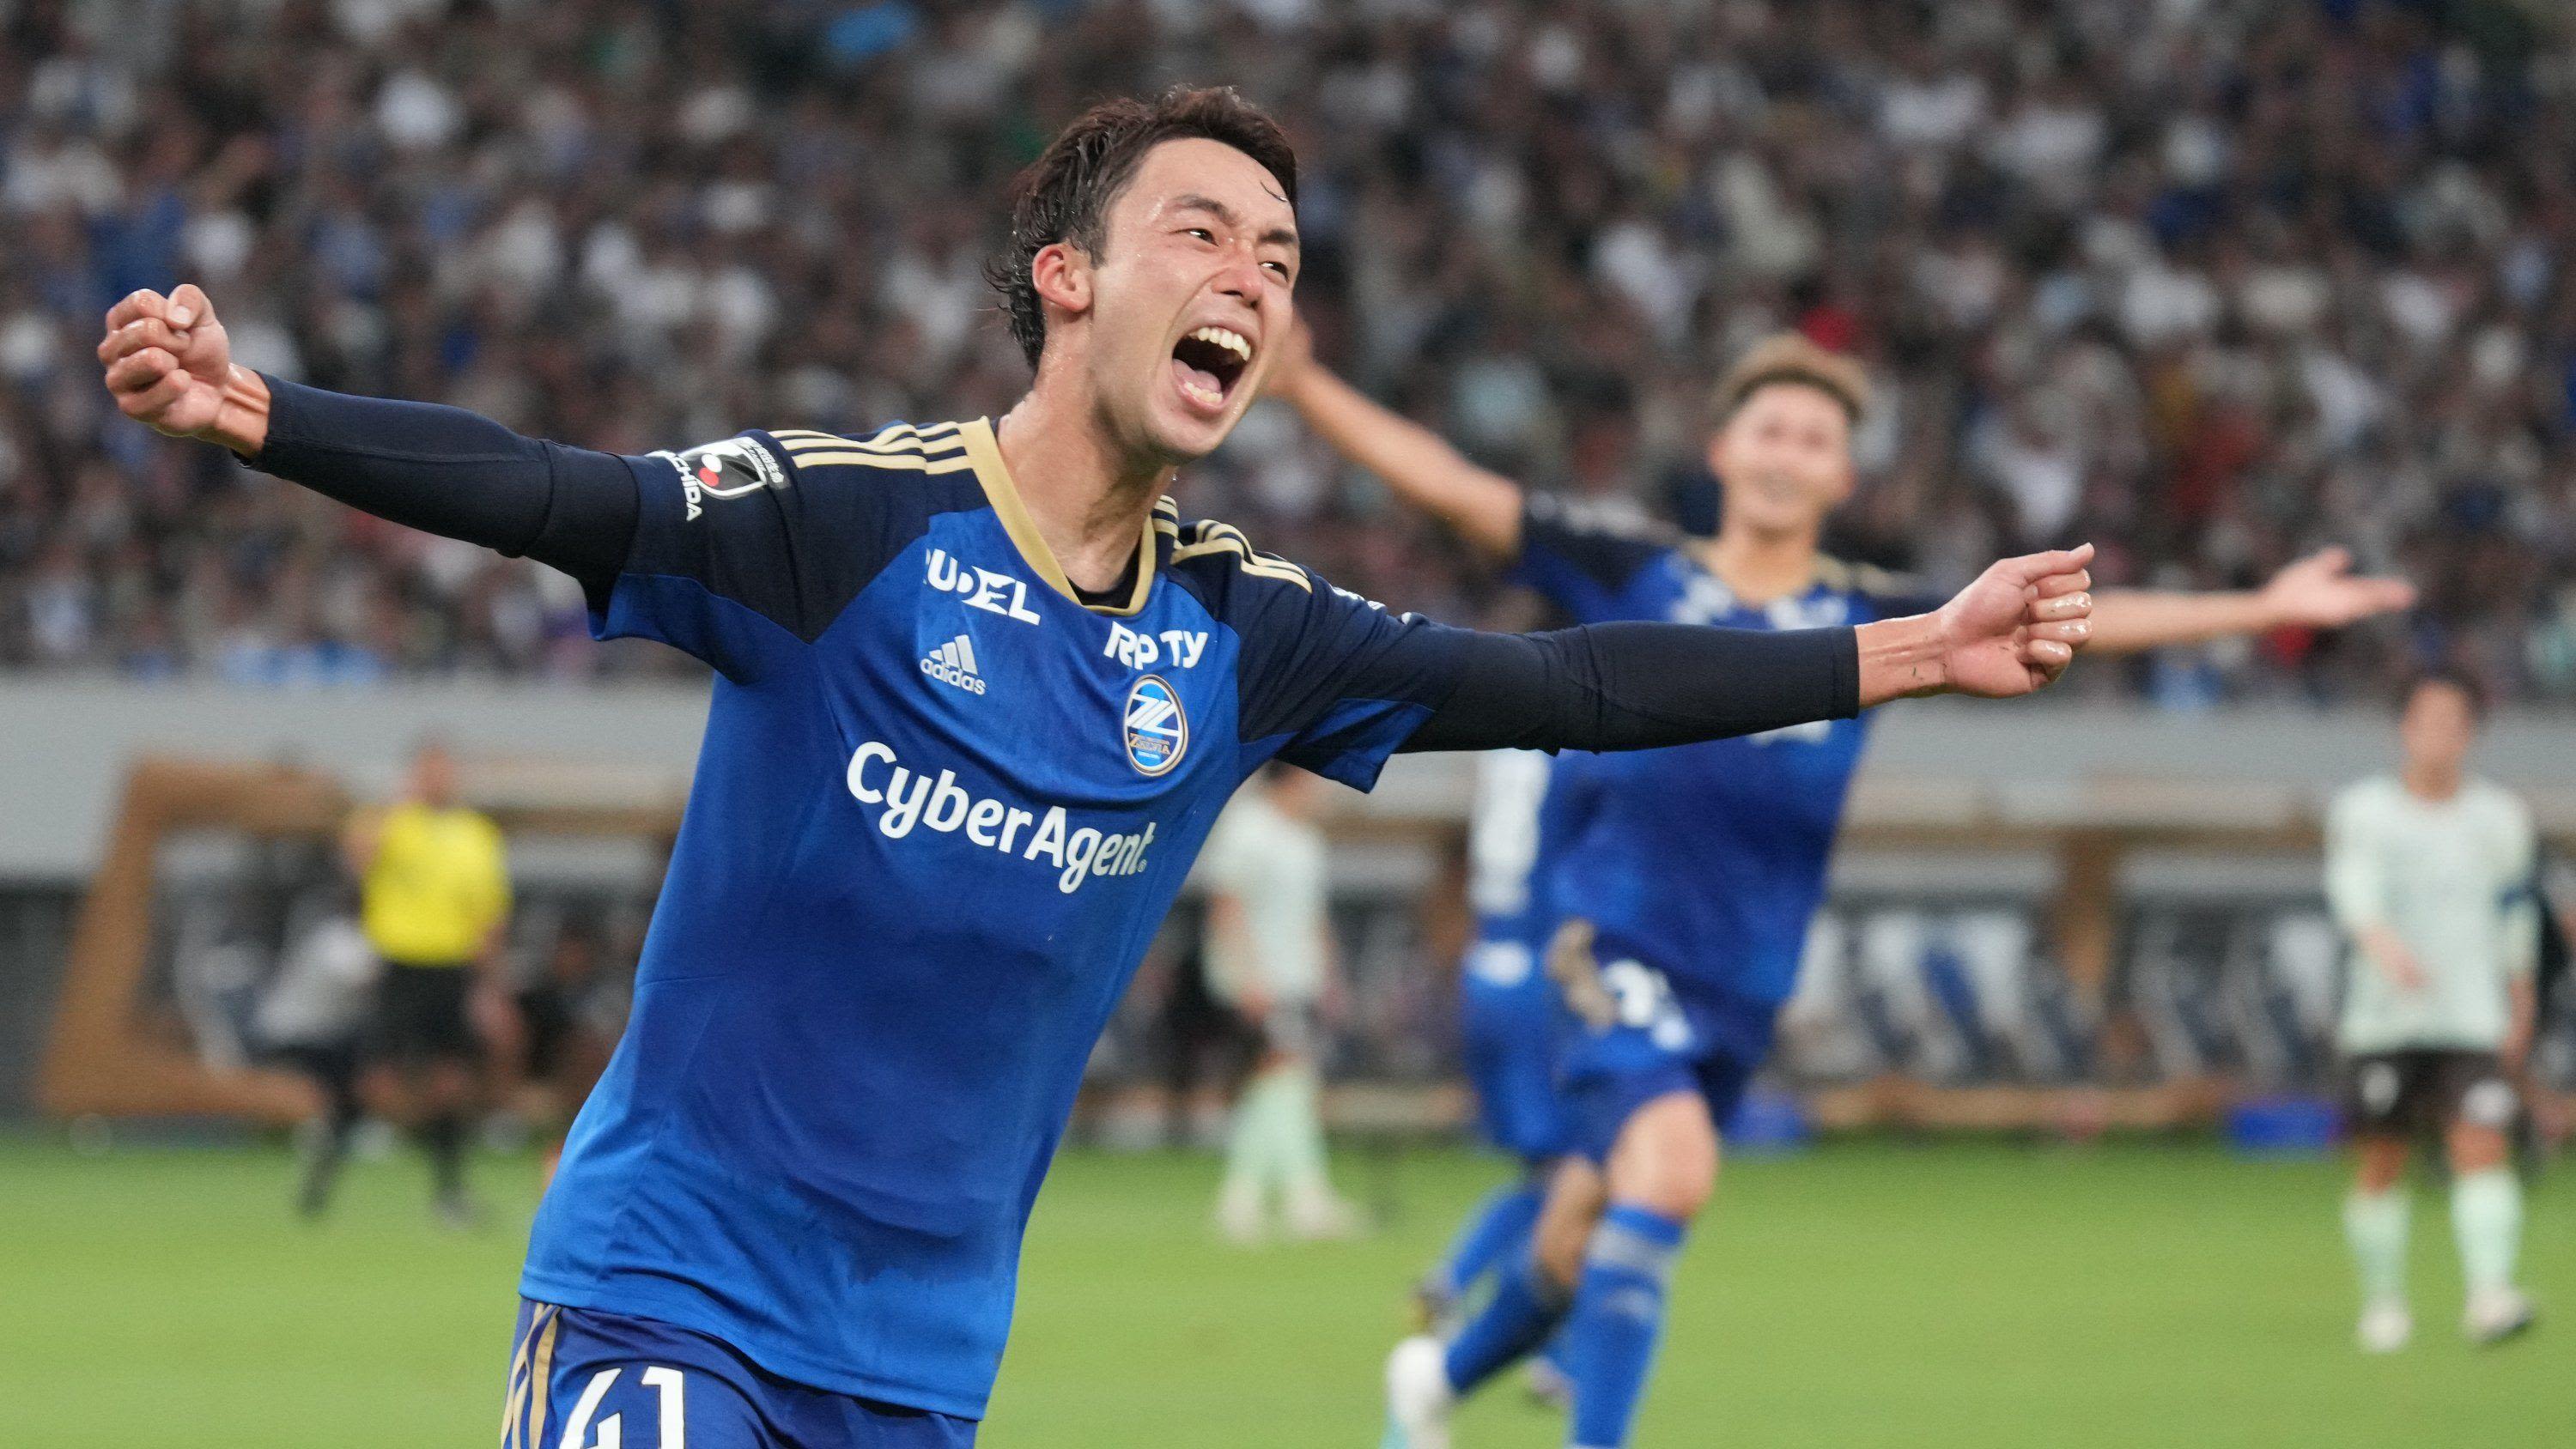 Biggest underdog story ever? Meet J-League debutants going for the title